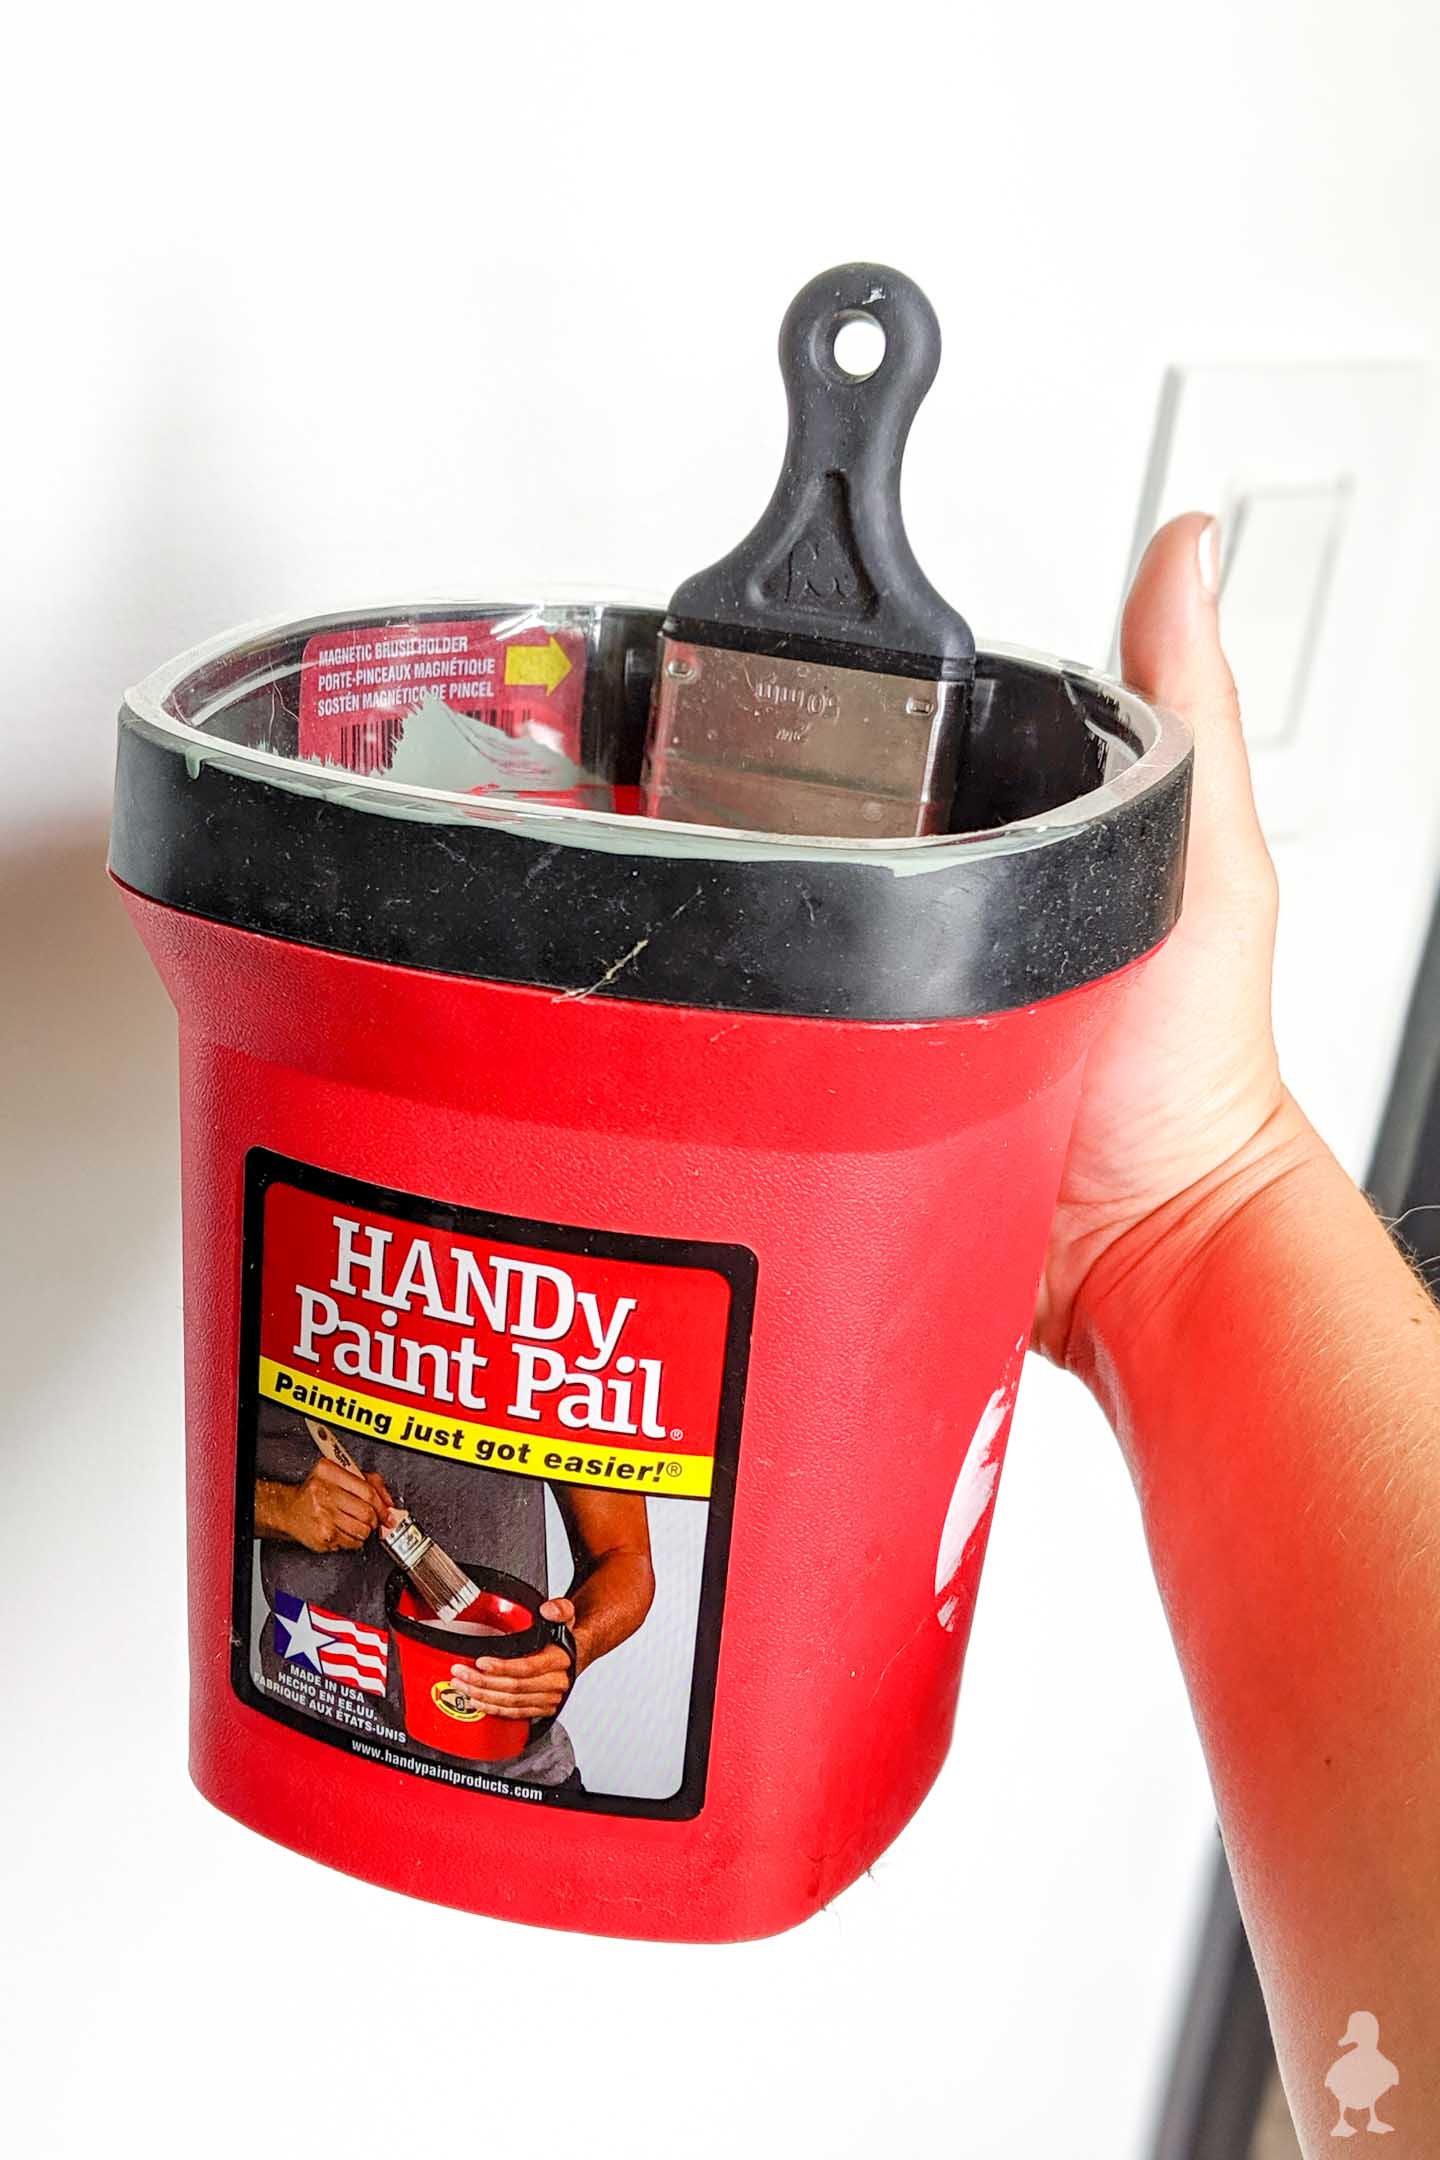 handy paint pail allows for better paint control up and down ladders